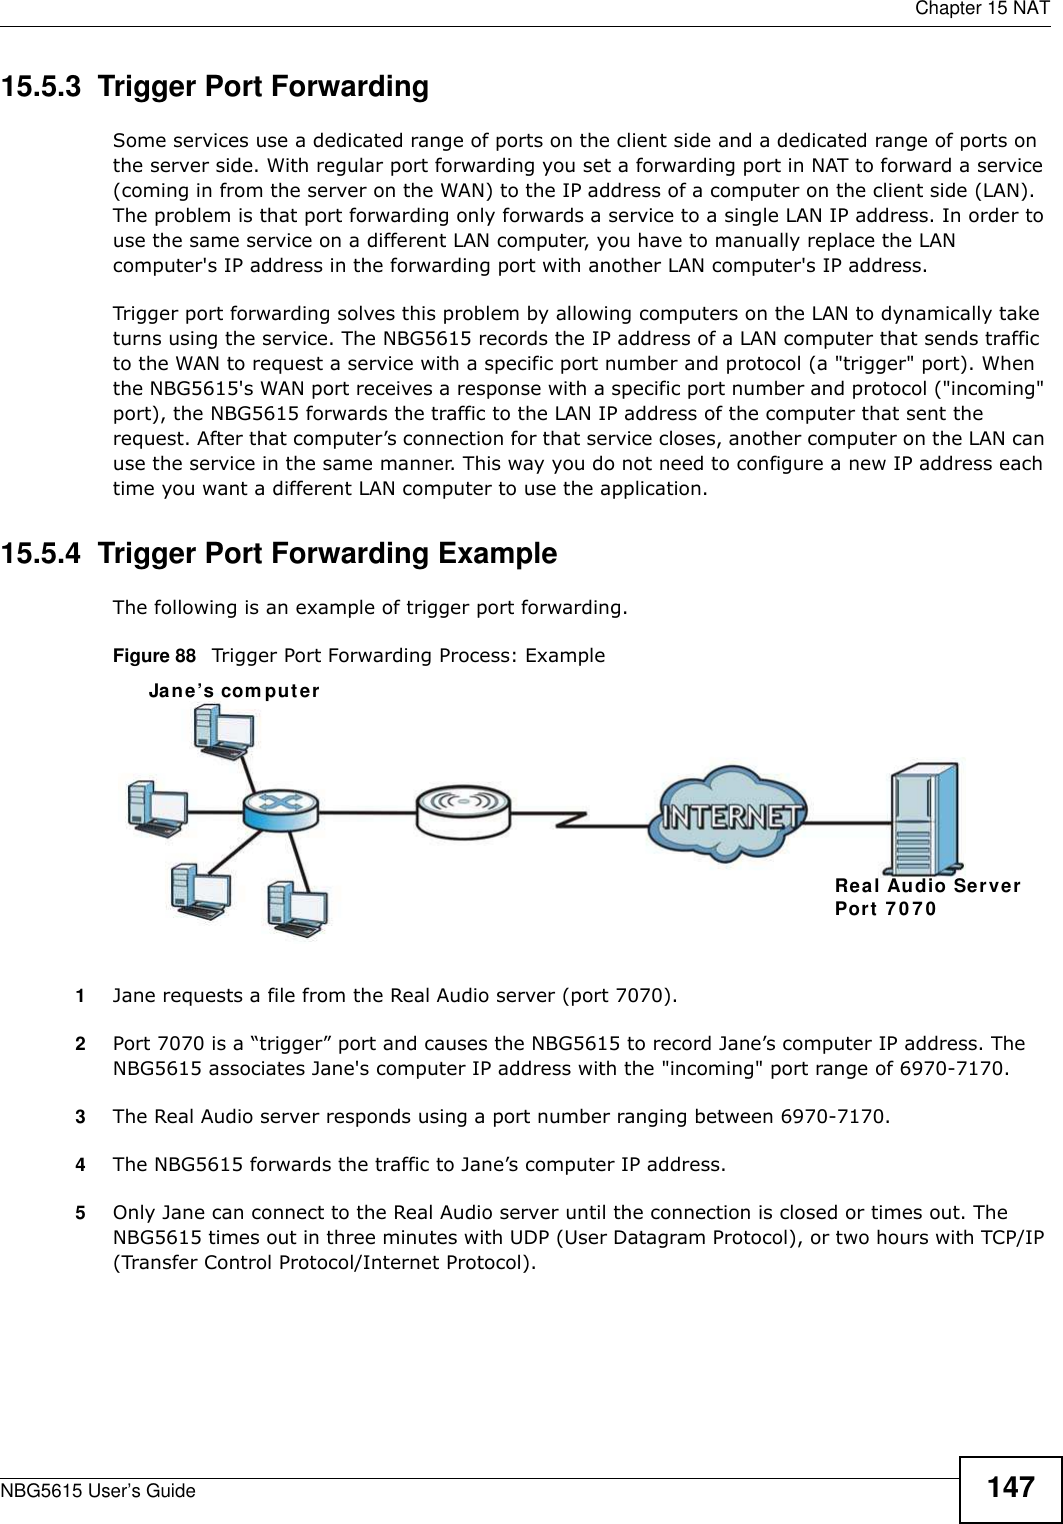  Chapter 15 NATNBG5615 User’s Guide 14715.5.3  Trigger Port Forwarding Some services use a dedicated range of ports on the client side and a dedicated range of ports on the server side. With regular port forwarding you set a forwarding port in NAT to forward a service (coming in from the server on the WAN) to the IP address of a computer on the client side (LAN). The problem is that port forwarding only forwards a service to a single LAN IP address. In order to use the same service on a different LAN computer, you have to manually replace the LAN computer&apos;s IP address in the forwarding port with another LAN computer&apos;s IP address. Trigger port forwarding solves this problem by allowing computers on the LAN to dynamically take turns using the service. The NBG5615 records the IP address of a LAN computer that sends traffic to the WAN to request a service with a specific port number and protocol (a &quot;trigger&quot; port). When the NBG5615&apos;s WAN port receives a response with a specific port number and protocol (&quot;incoming&quot; port), the NBG5615 forwards the traffic to the LAN IP address of the computer that sent the request. After that computer’s connection for that service closes, another computer on the LAN can use the service in the same manner. This way you do not need to configure a new IP address each time you want a different LAN computer to use the application.15.5.4  Trigger Port Forwarding Example The following is an example of trigger port forwarding.Figure 88   Trigger Port Forwarding Process: Example1Jane requests a file from the Real Audio server (port 7070).2Port 7070 is a “trigger” port and causes the NBG5615 to record Jane’s computer IP address. The NBG5615 associates Jane&apos;s computer IP address with the &quot;incoming&quot; port range of 6970-7170.3The Real Audio server responds using a port number ranging between 6970-7170.4The NBG5615 forwards the traffic to Jane’s computer IP address. 5Only Jane can connect to the Real Audio server until the connection is closed or times out. The NBG5615 times out in three minutes with UDP (User Datagram Protocol), or two hours with TCP/IP (Transfer Control Protocol/Internet Protocol). Jane’s com puterReal Audio ServerPort 707 0